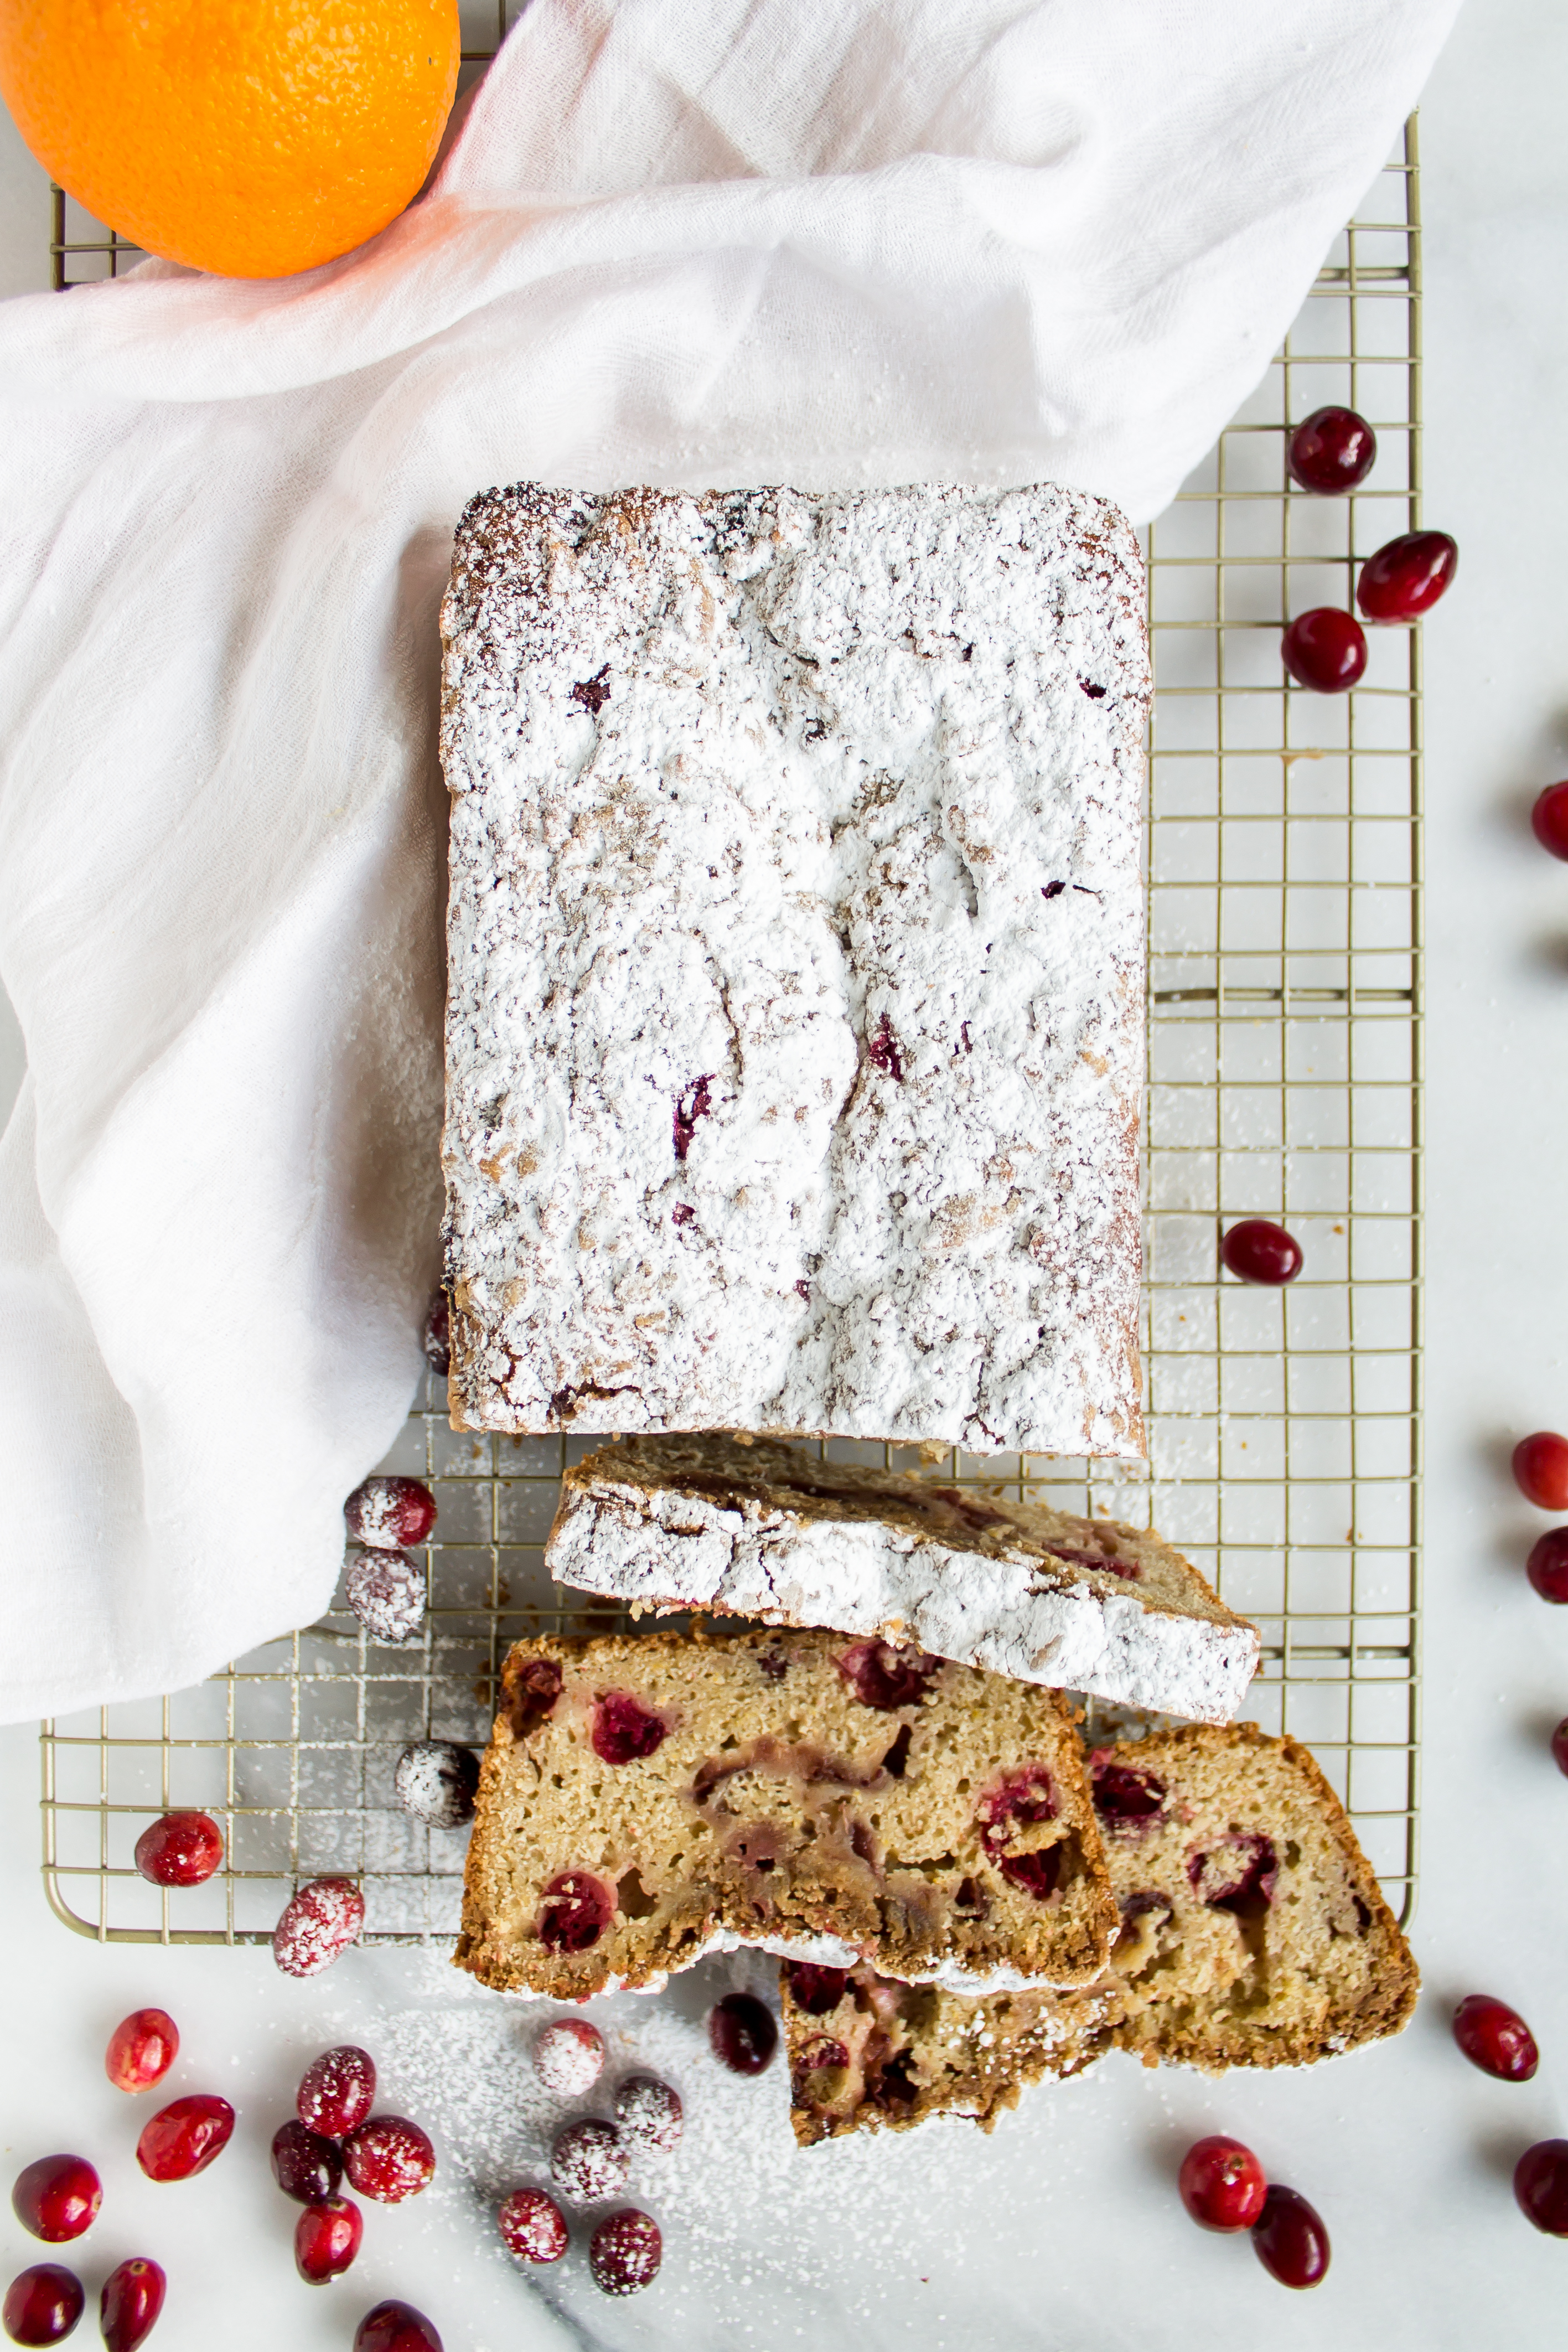 Cranberry quick bread is the perfect double duty bread! Make it for breakfast on Thanksgiving morning or use your leftover cranberry sauce to make a loaf for post-Thanksgiving enjoyment. | www.passthecookies.com